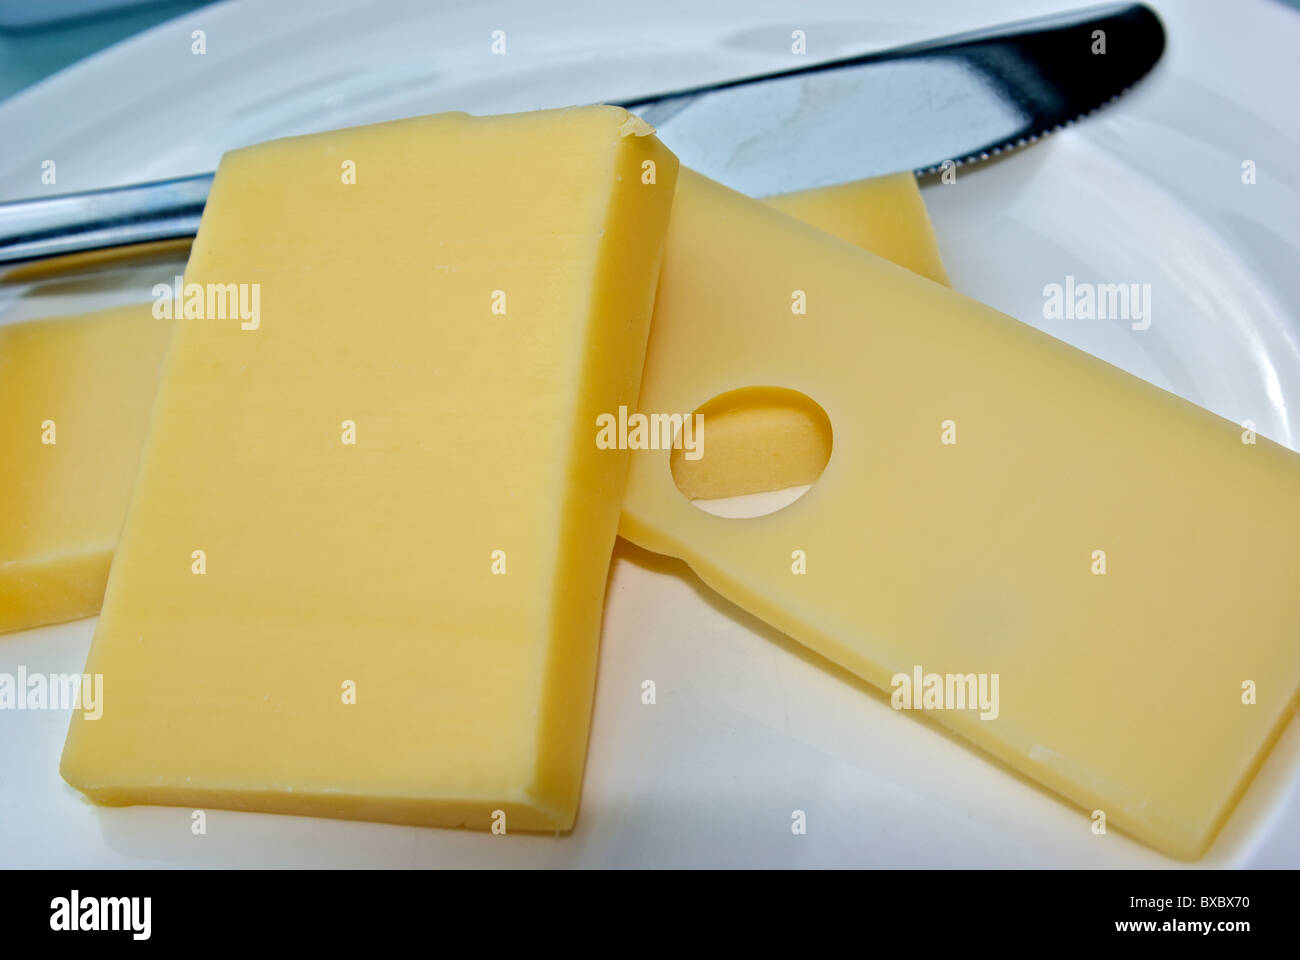 Cheese plate with three hard Swiss cheese slices Stock Photo